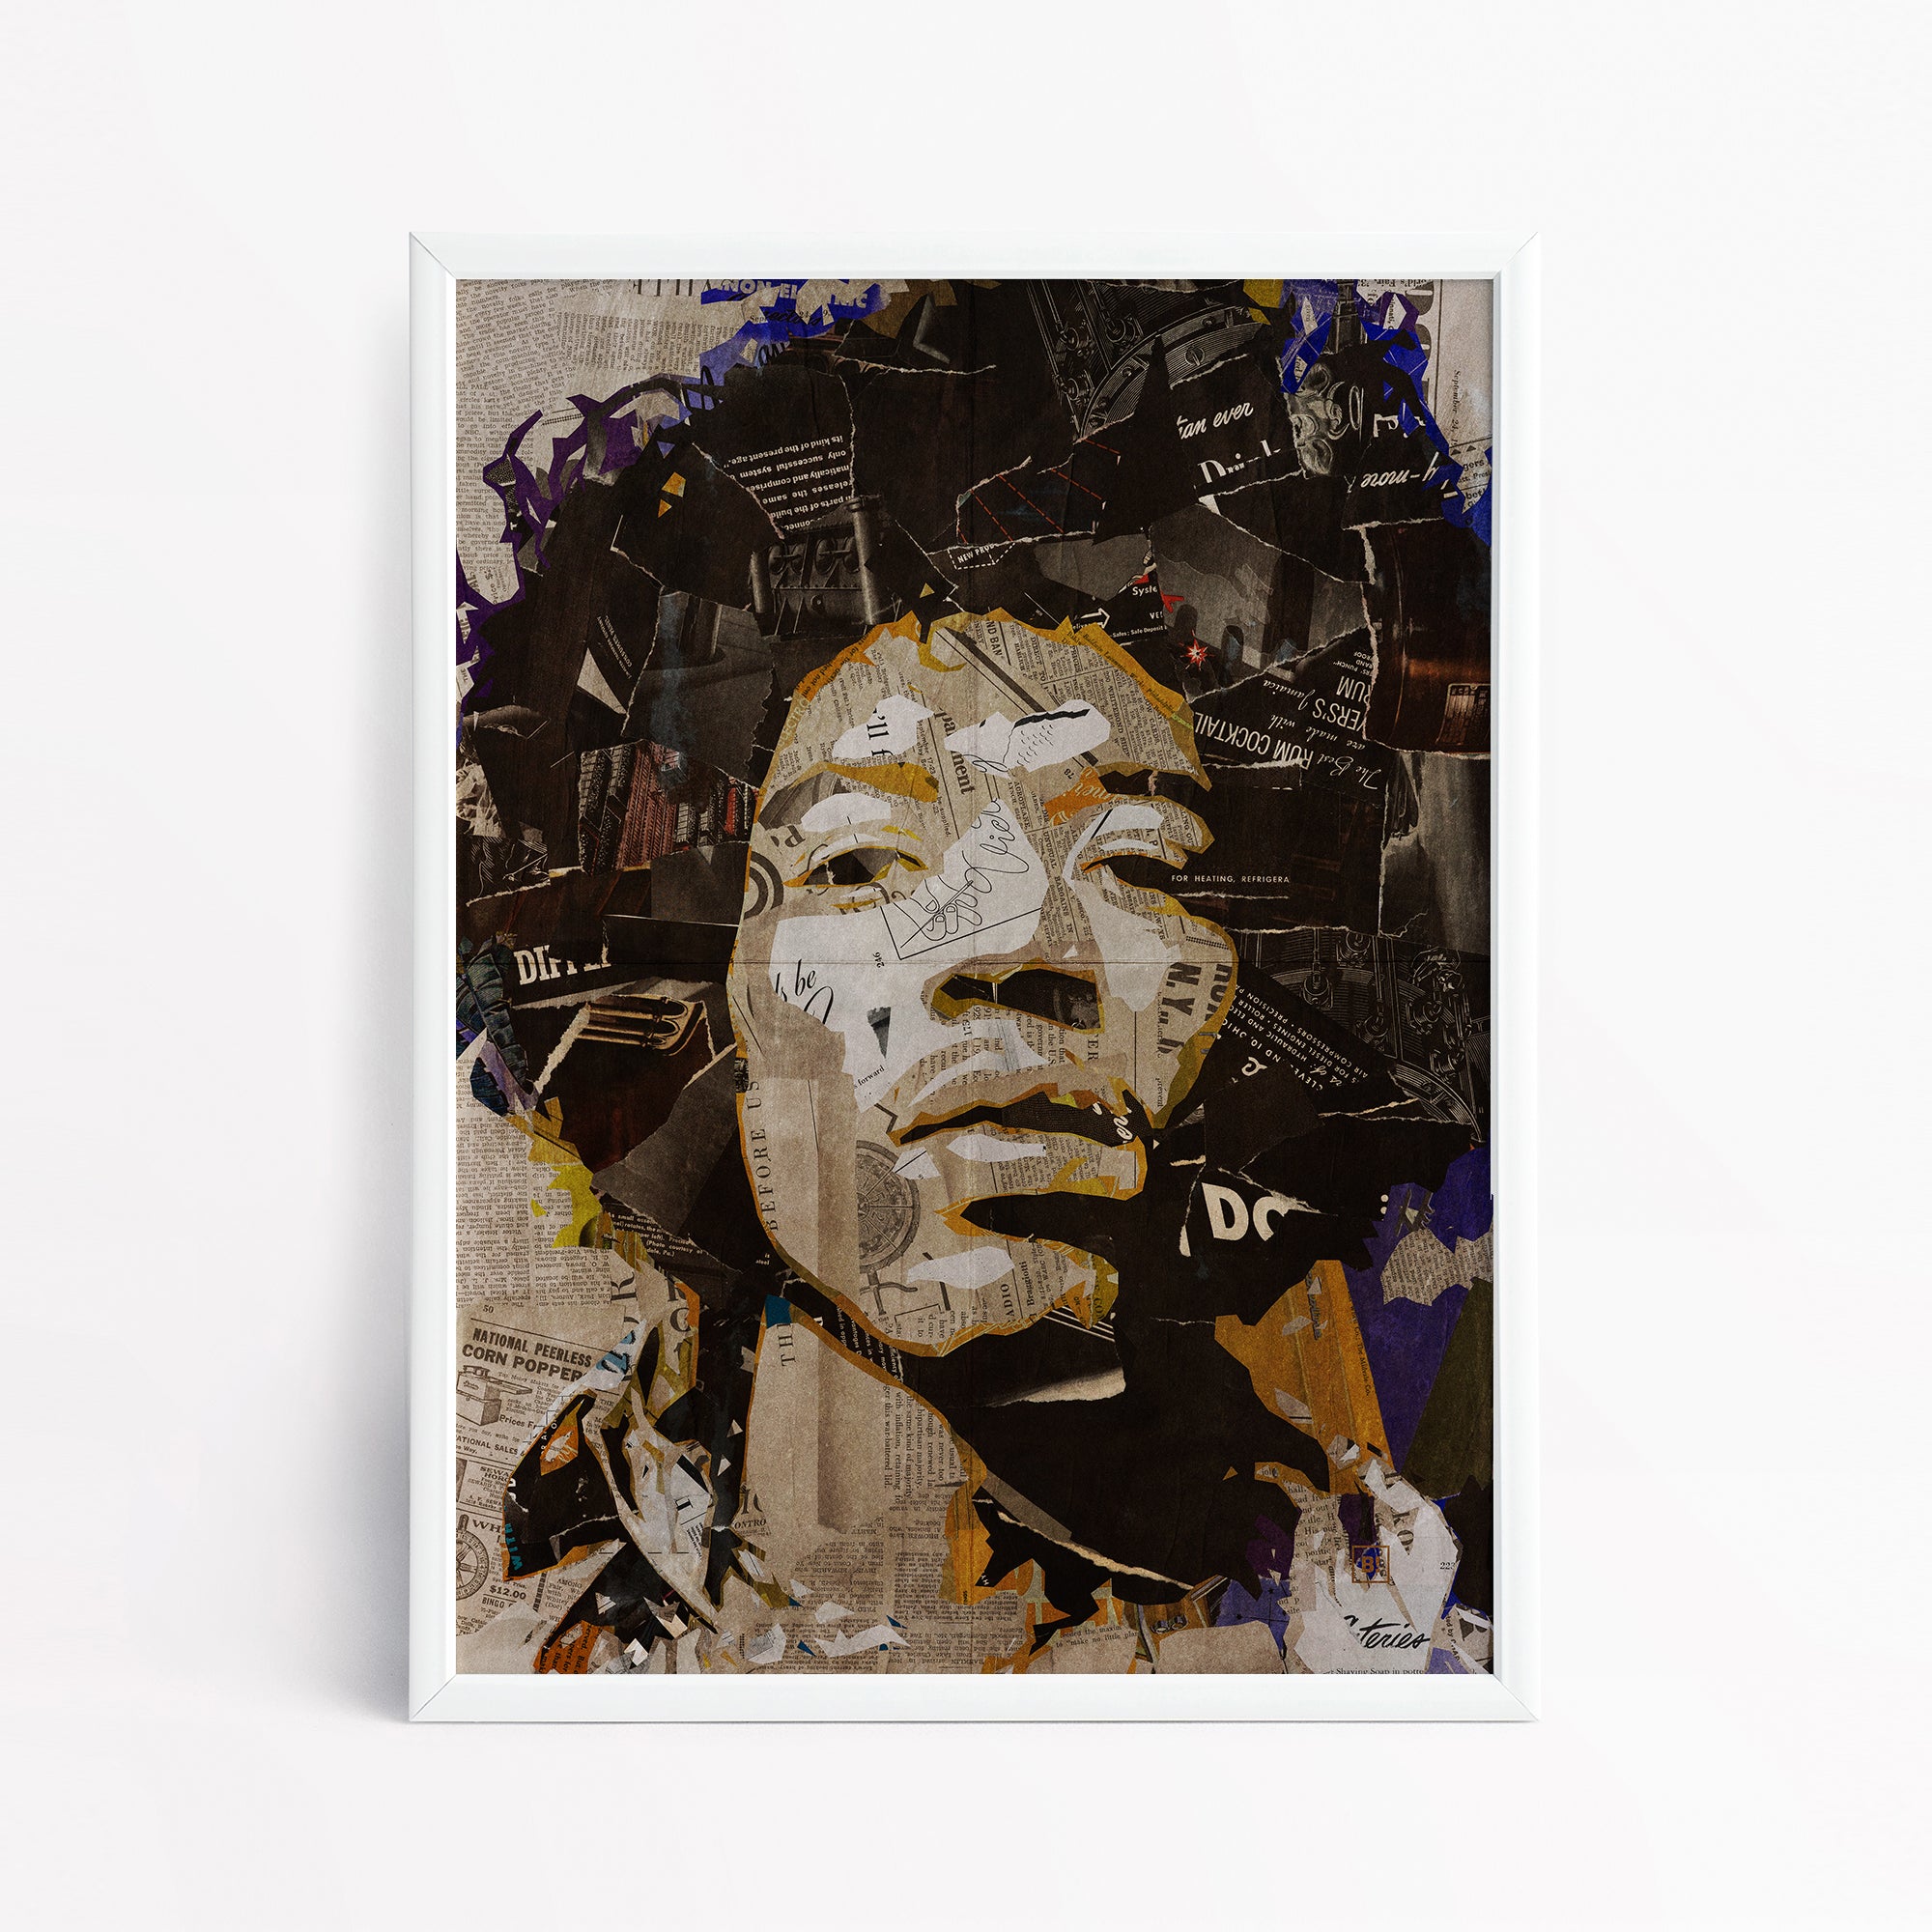 Be inspired by our iconic collage portrait art print of Jimi Hendrix. This artwork has been printed using the giclée process on archival acid-free paper and is presented in a sleek white frame, showcasing its timeless beauty in every detail.